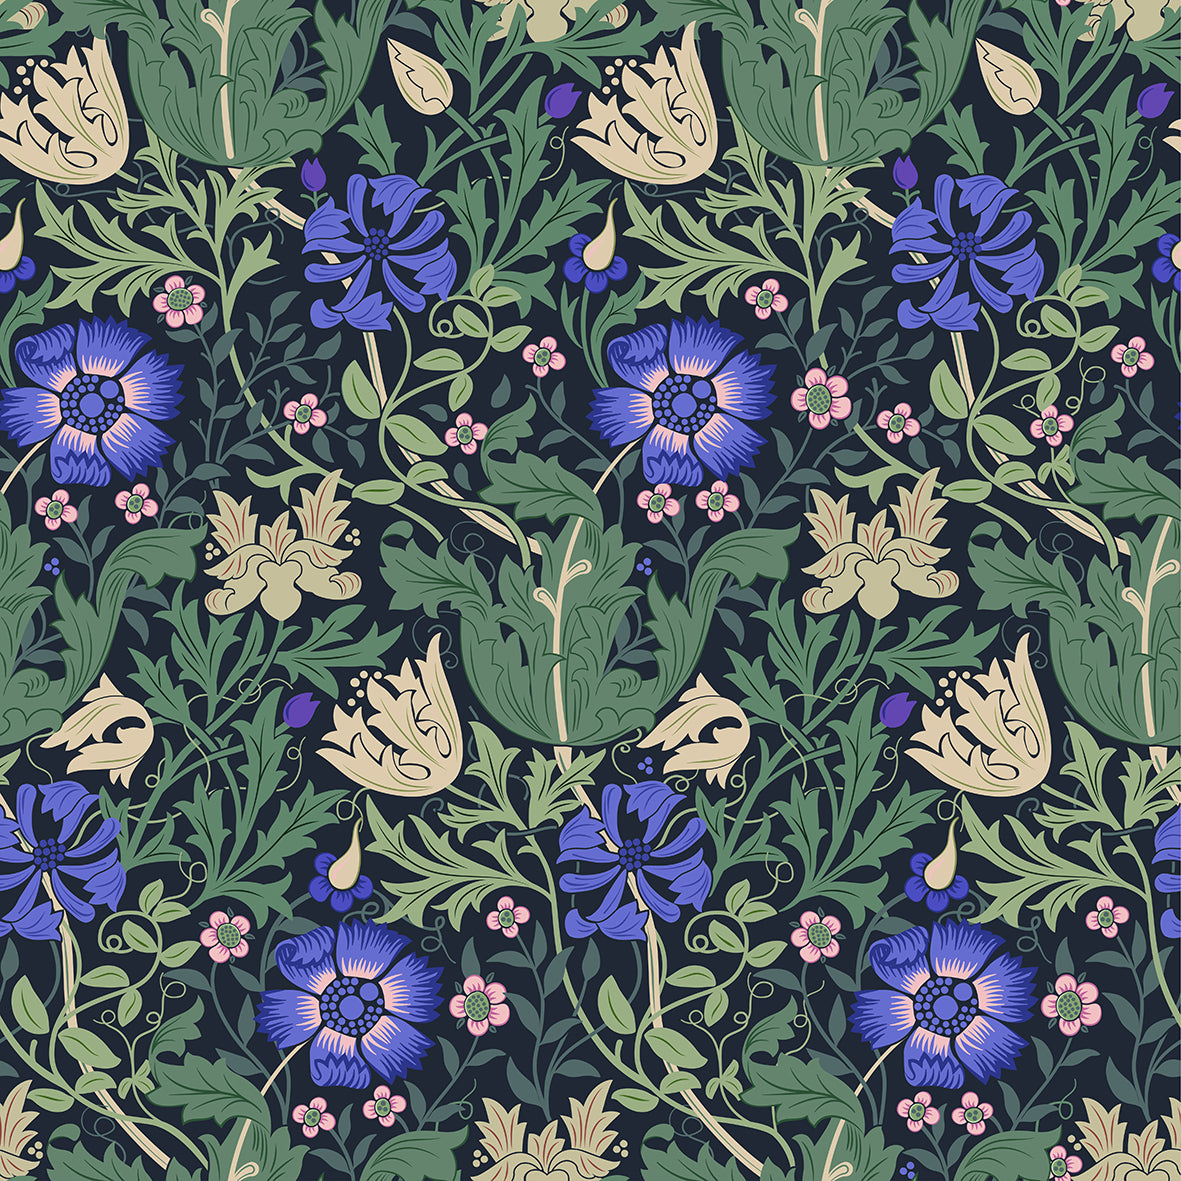 william-morris-co-memory-foam-bath-mat-compton-collection-bluebell-cottage-7